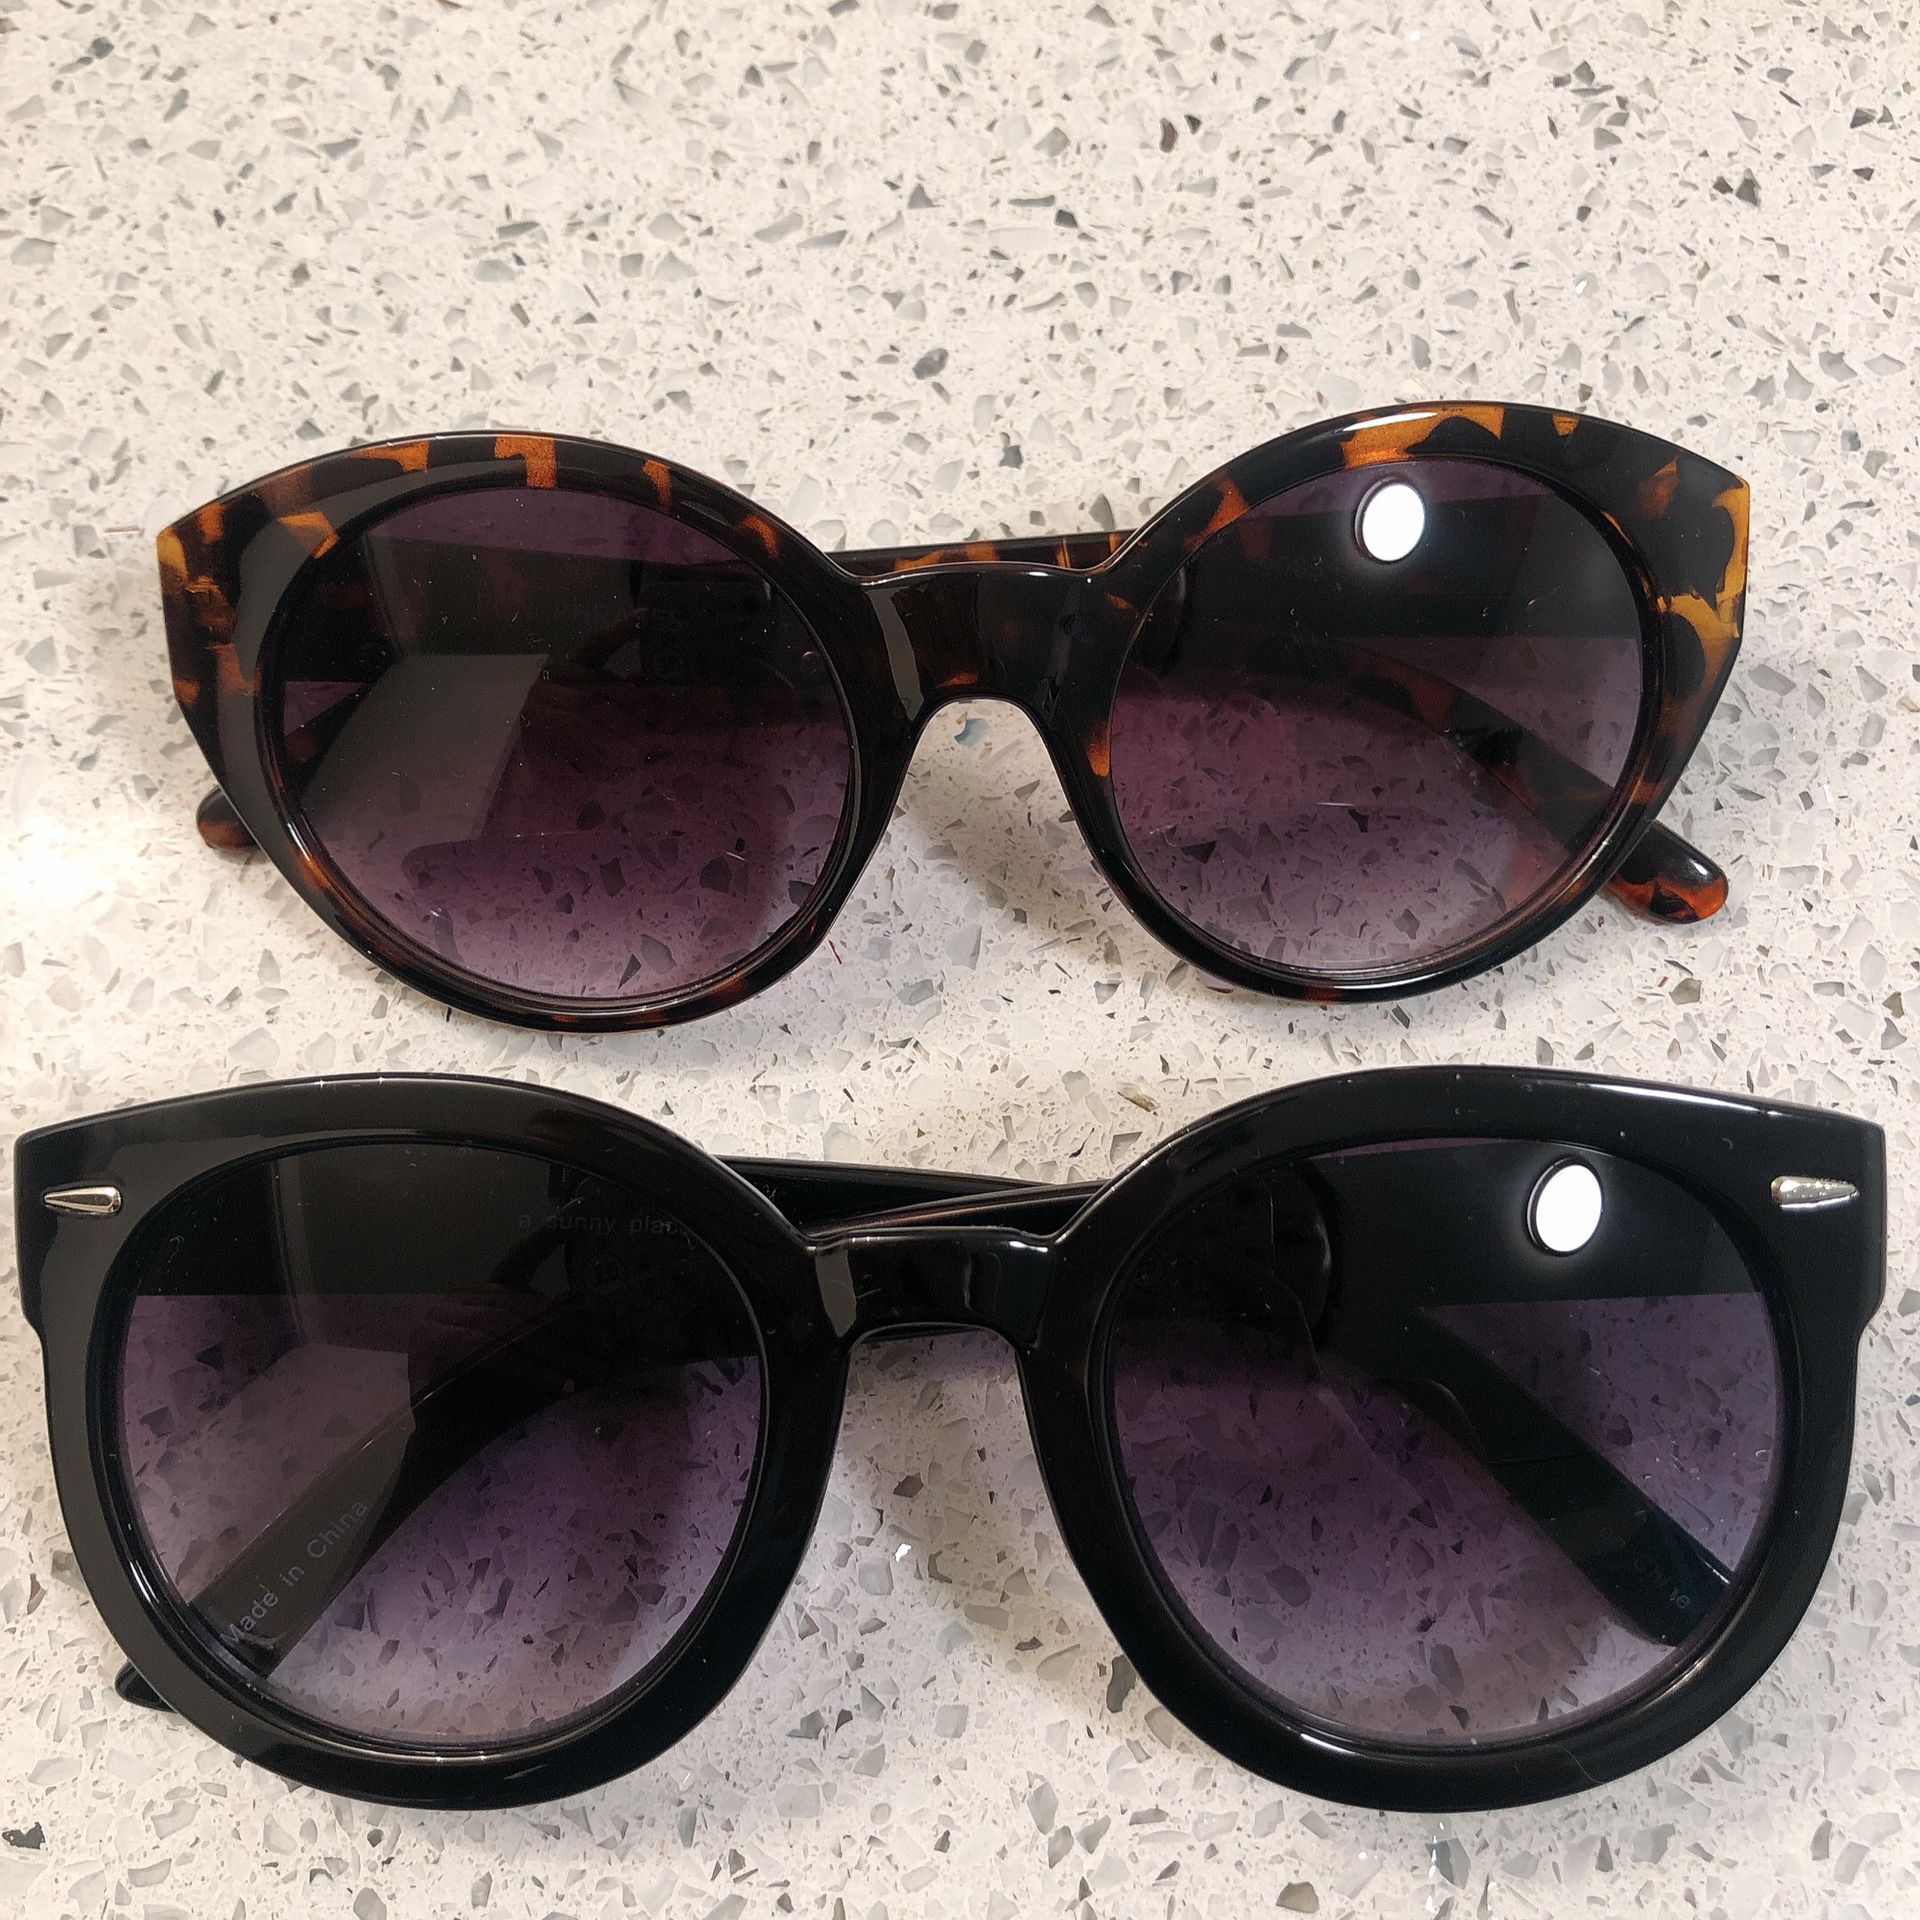 Two Urban Outfitters sunglasses